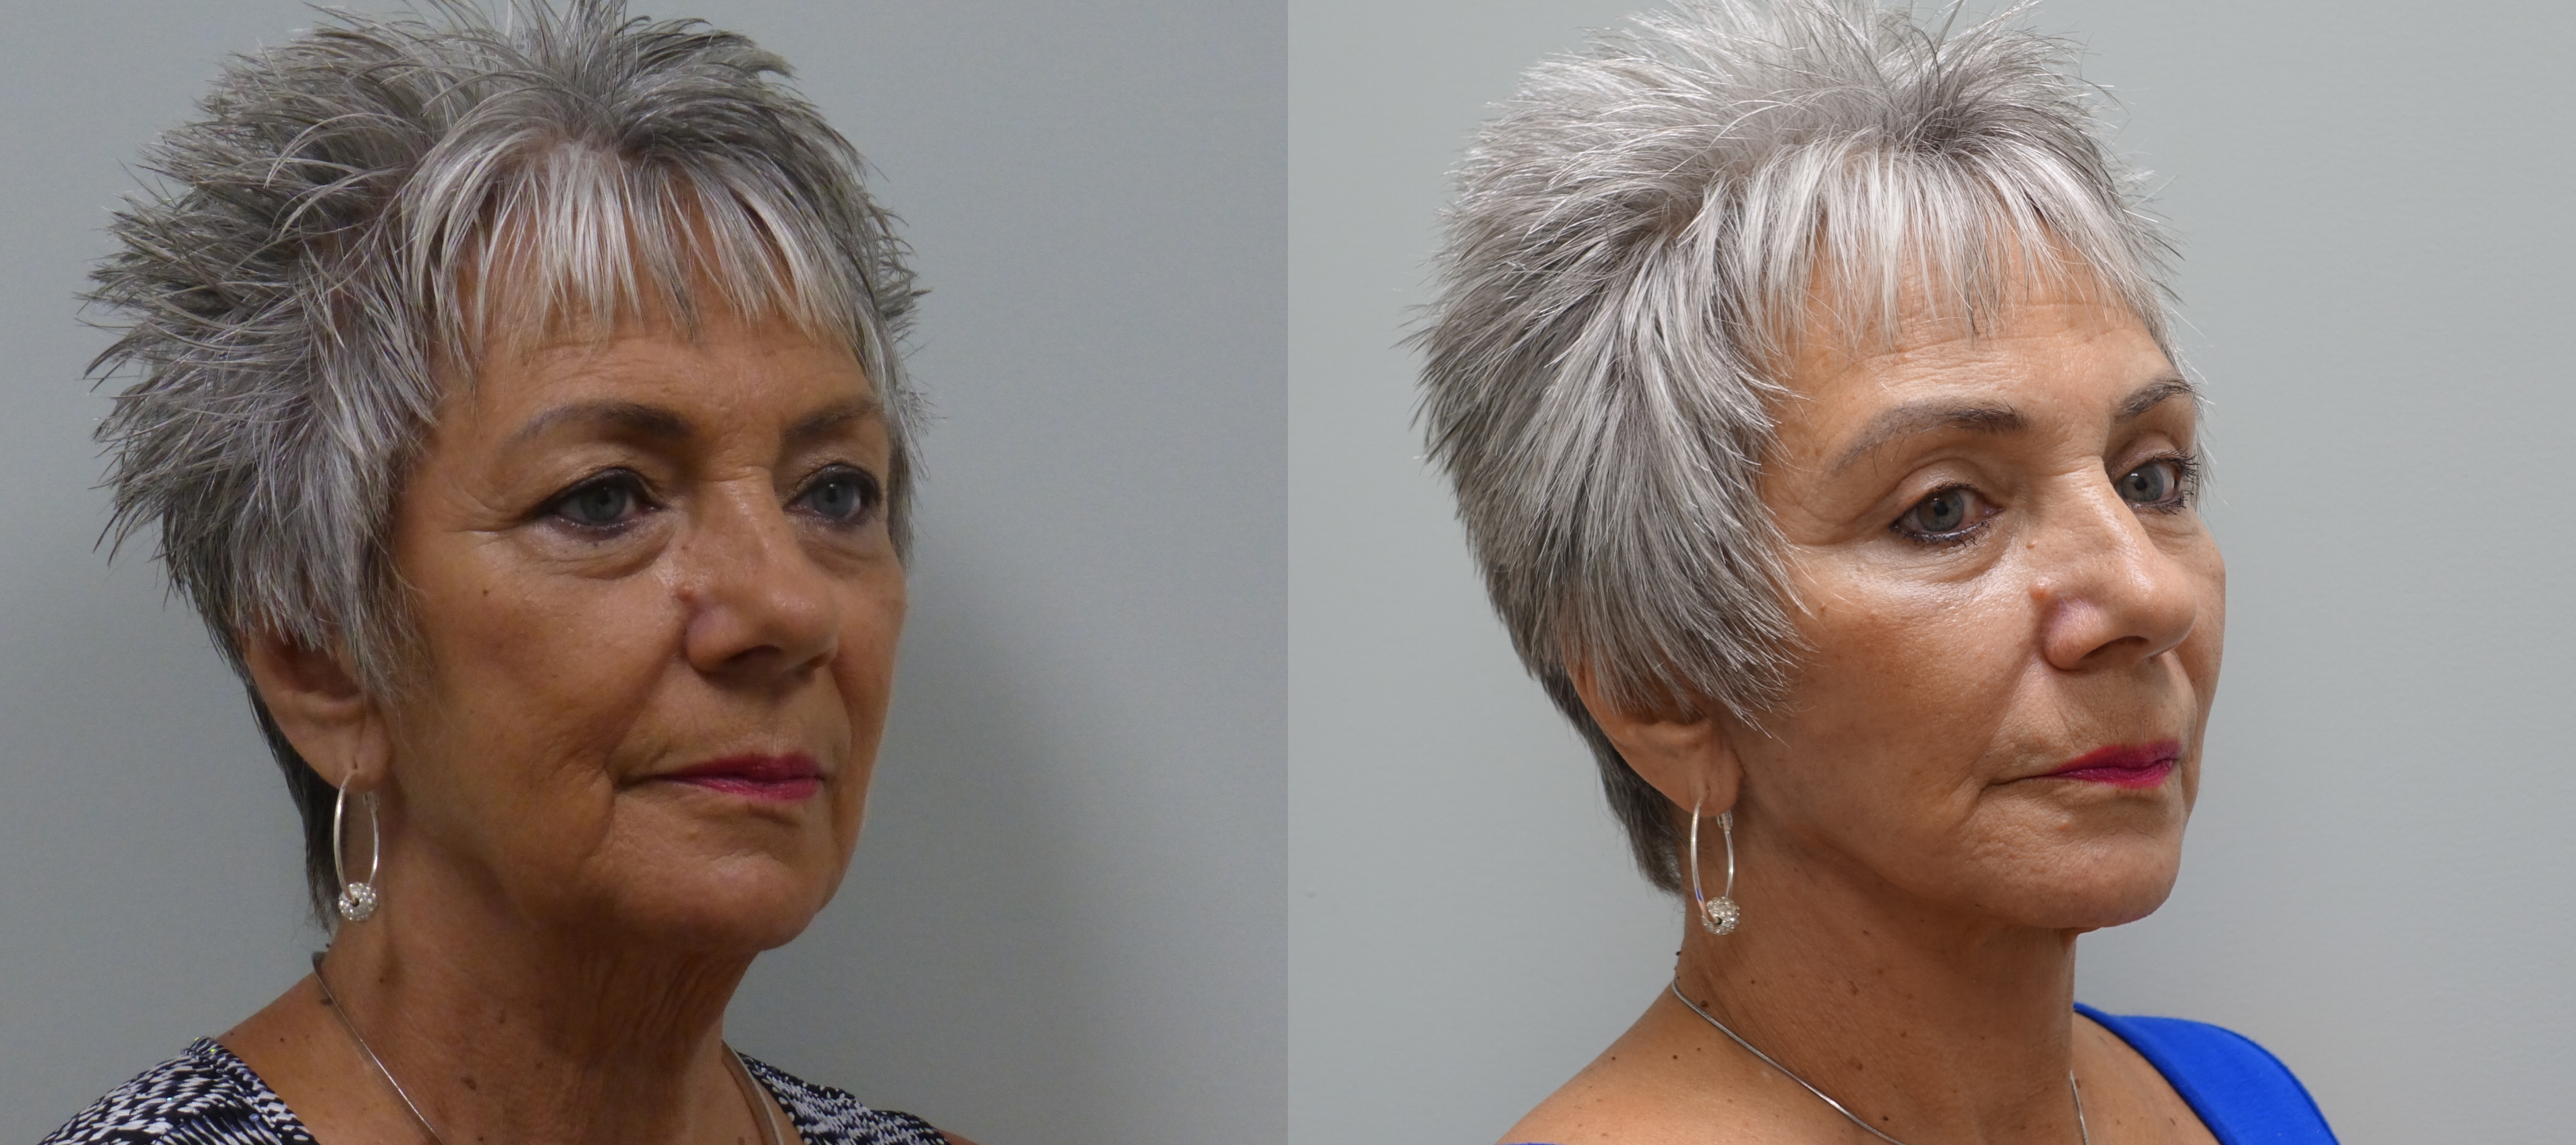 Before and after modified facelift with upper and lower lid blepharoplasty, and fat transfer to the face.